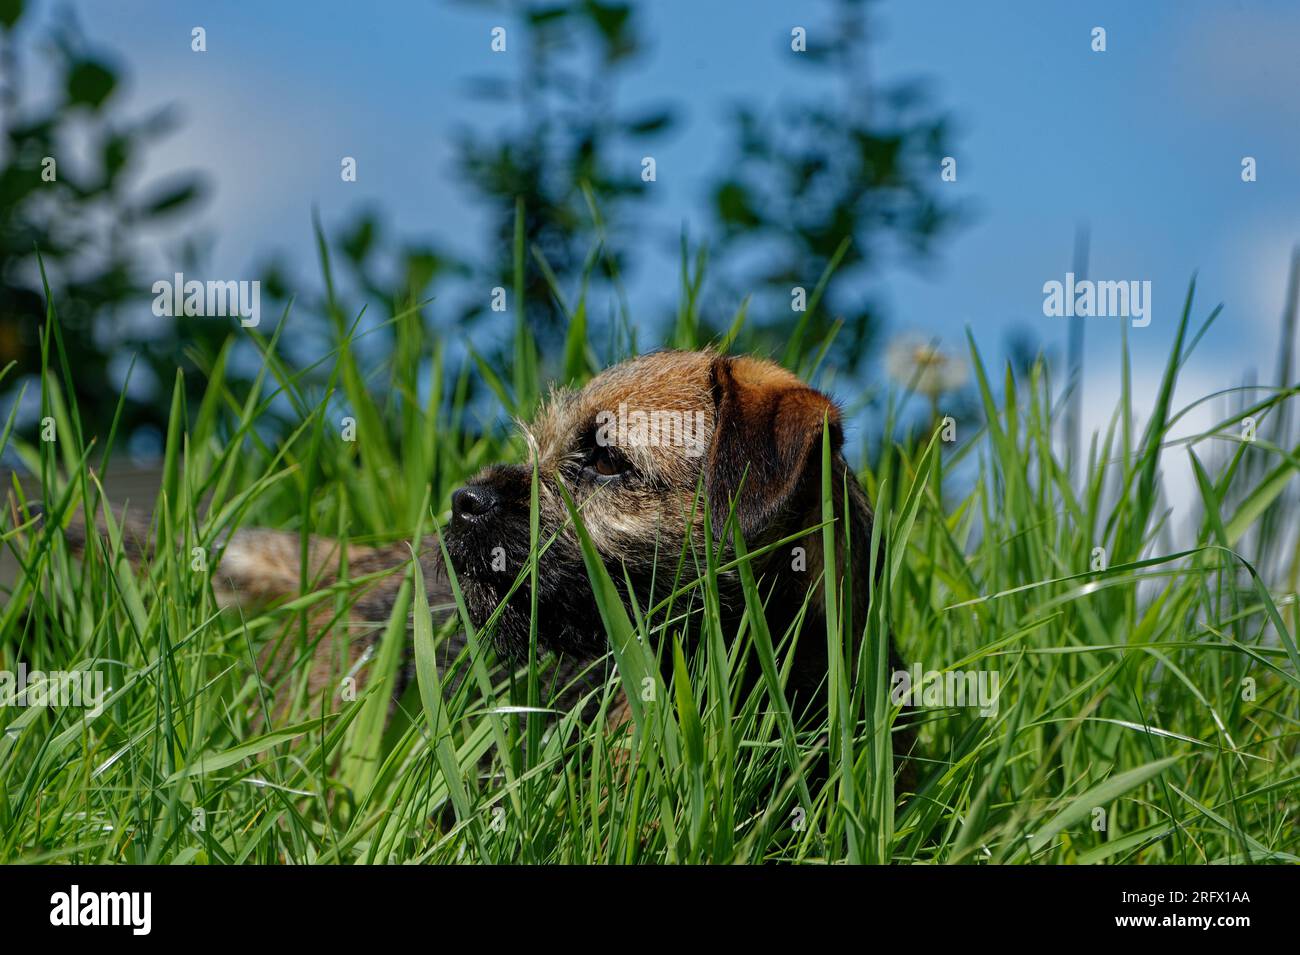 Border Terrier dog puppy laying down in grass Stock Photo